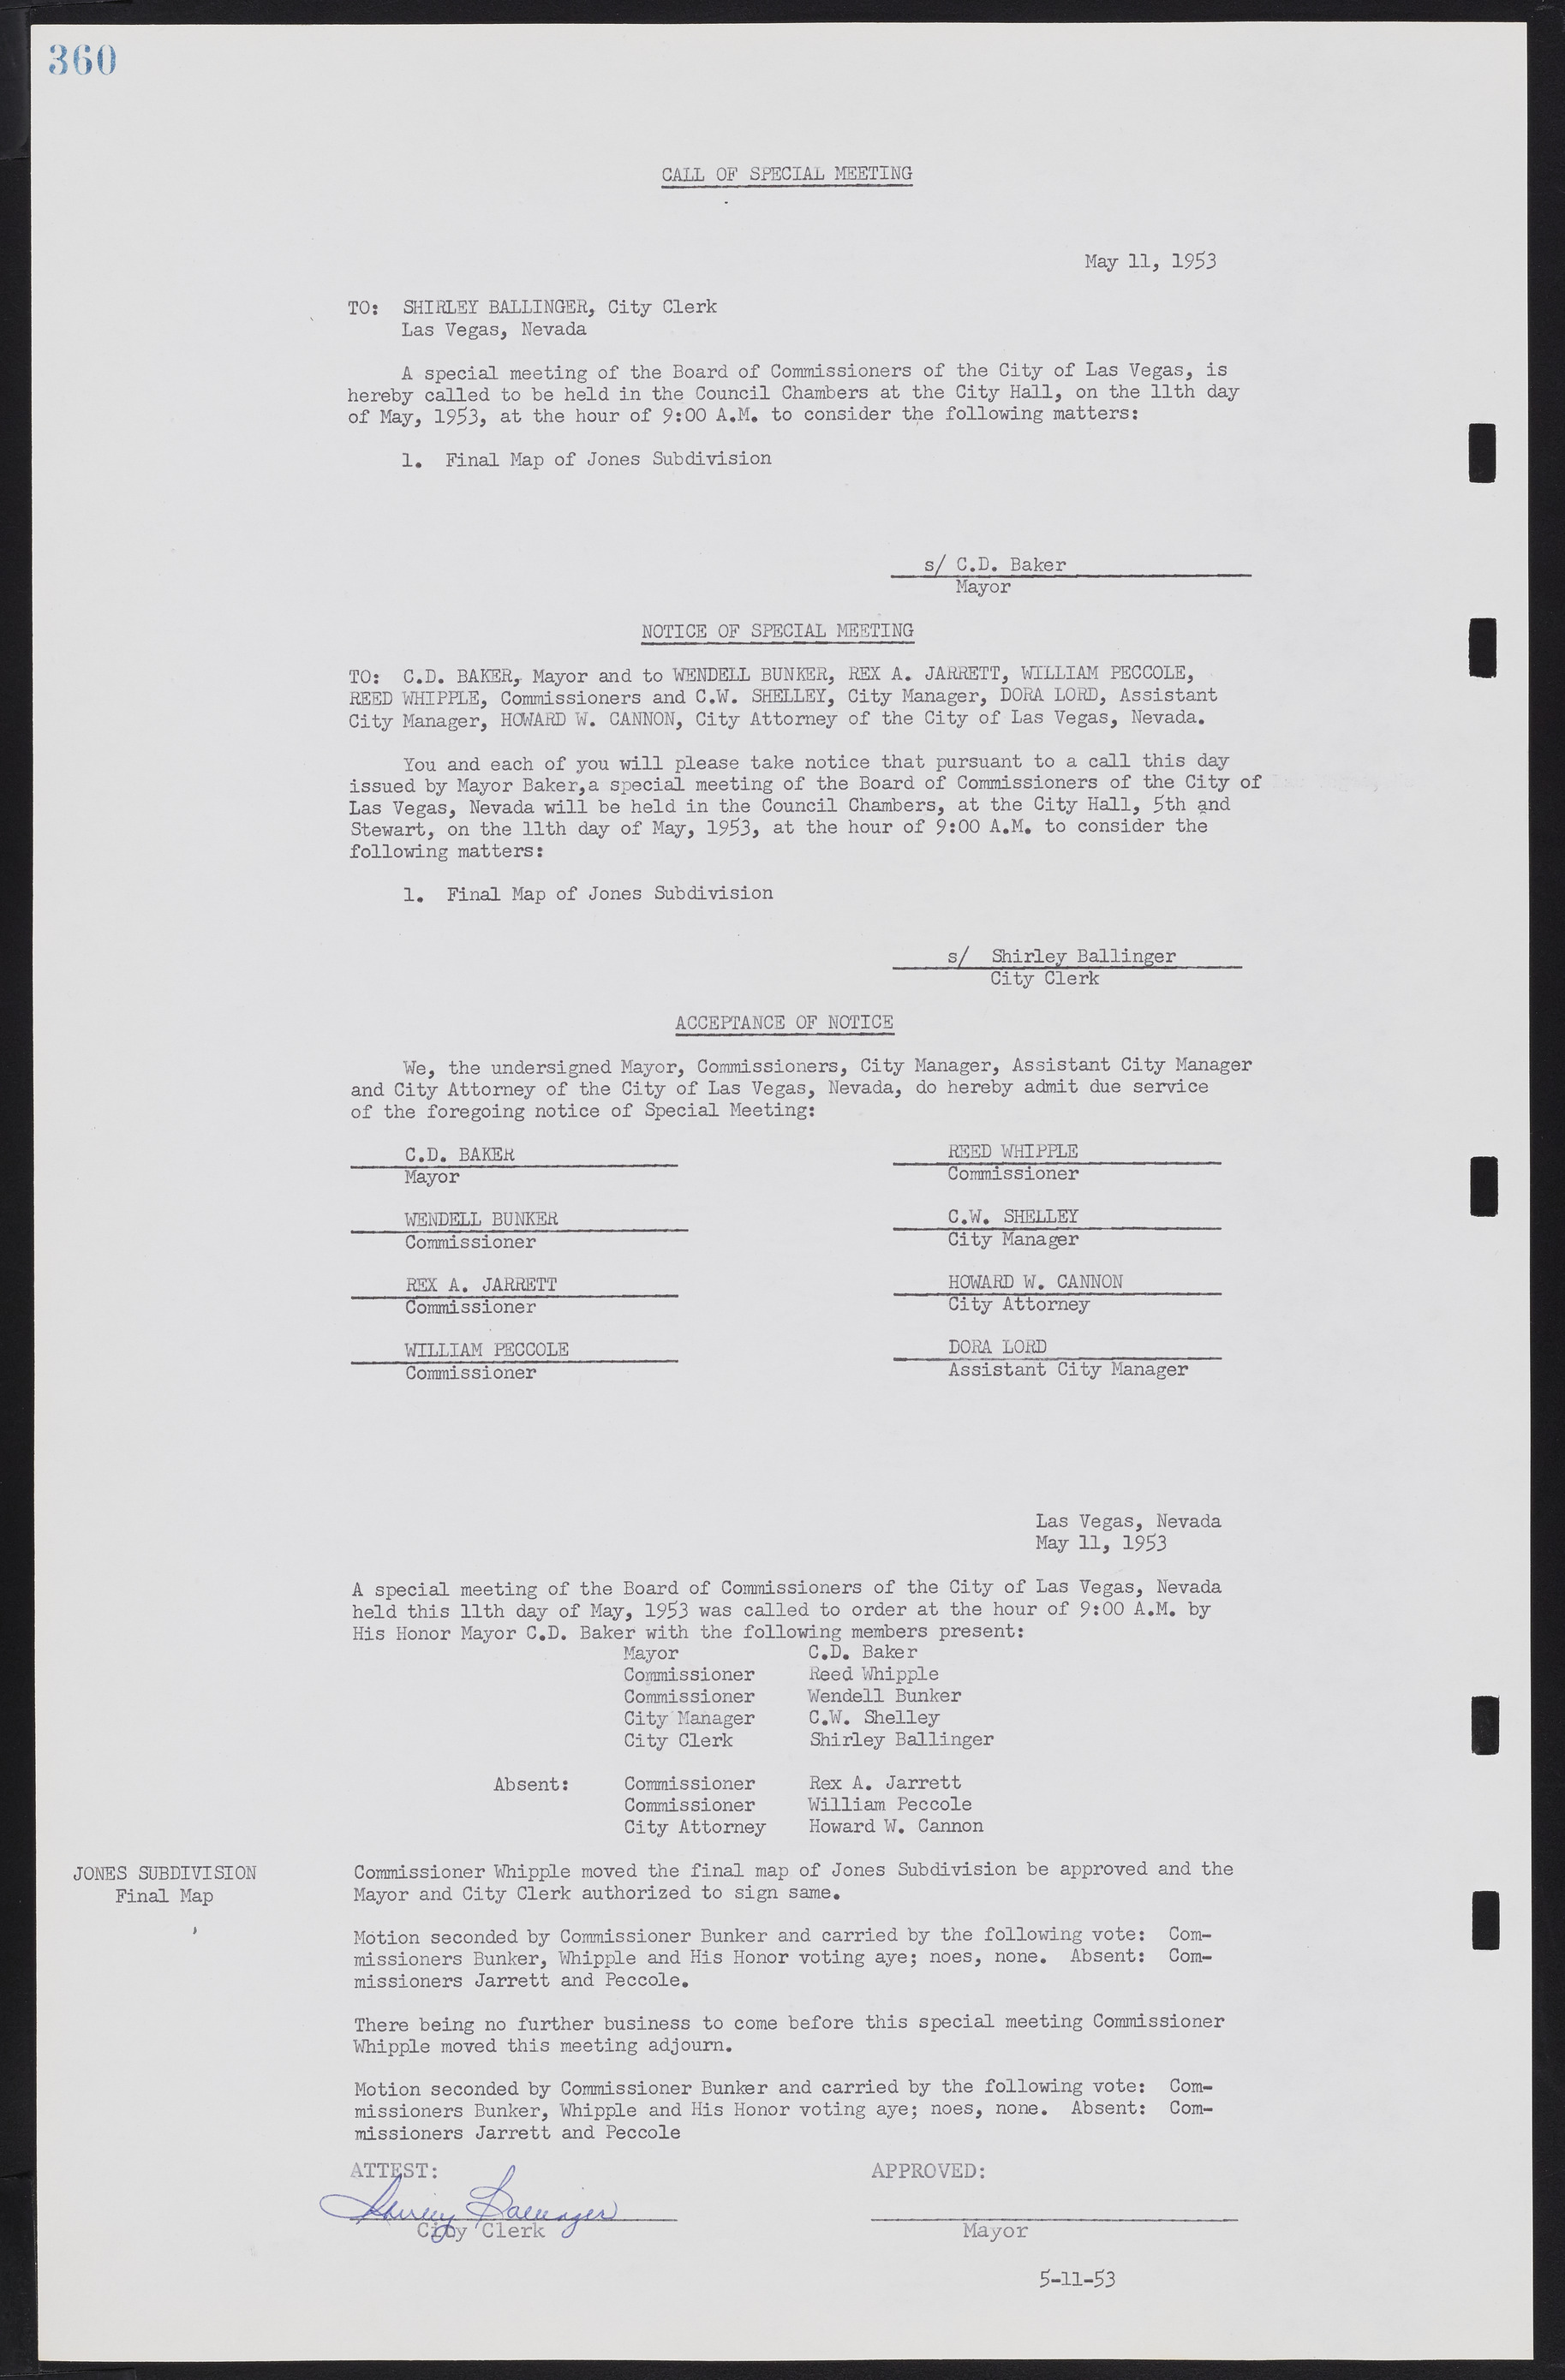 Las Vegas City Commission Minutes, May 26, 1952 to February 17, 1954, lvc000008-388